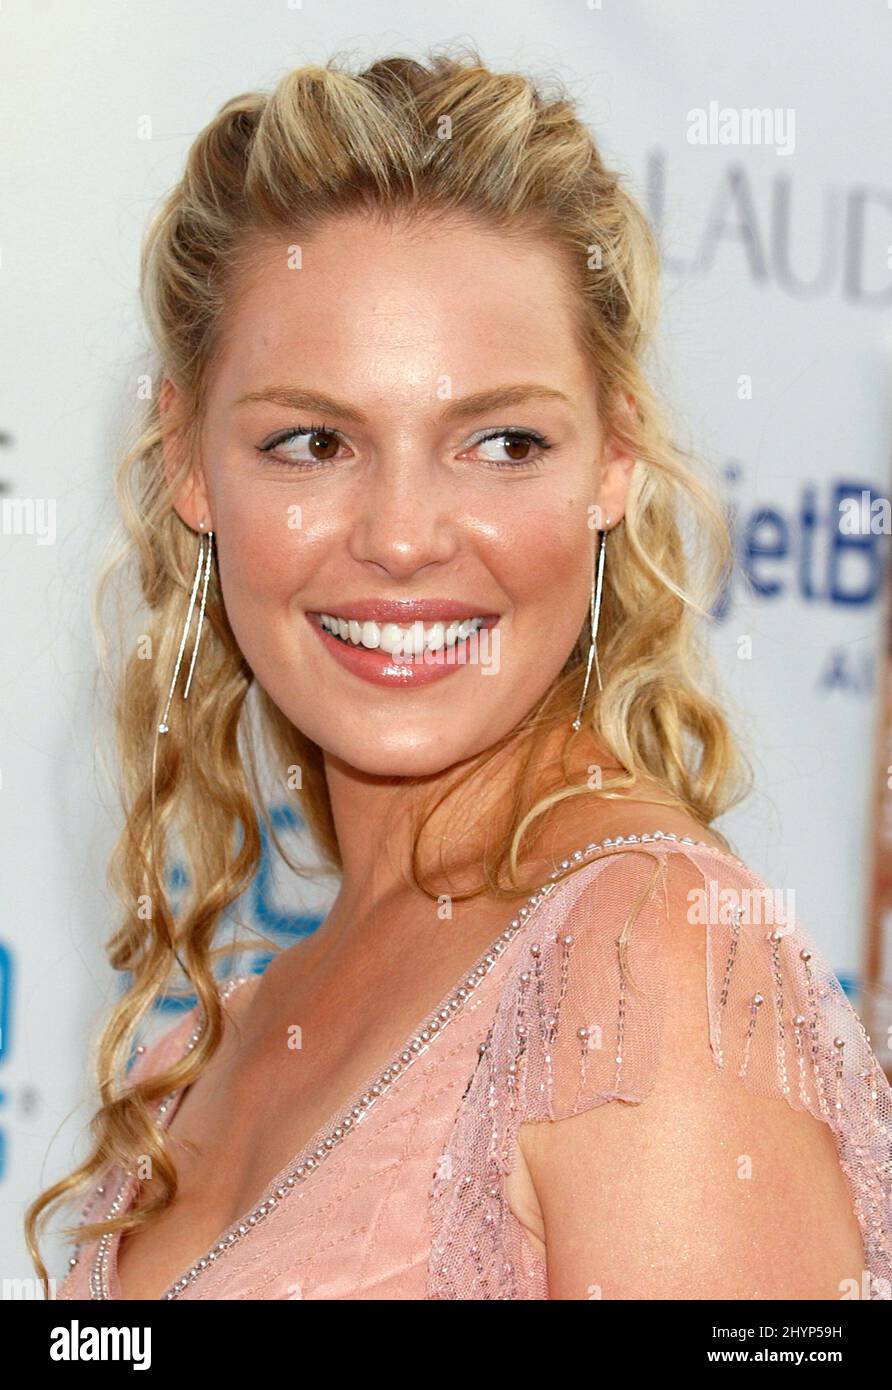 Katherine Heigl attends Movieline's 7th Annual Young Hollywood Awards ...